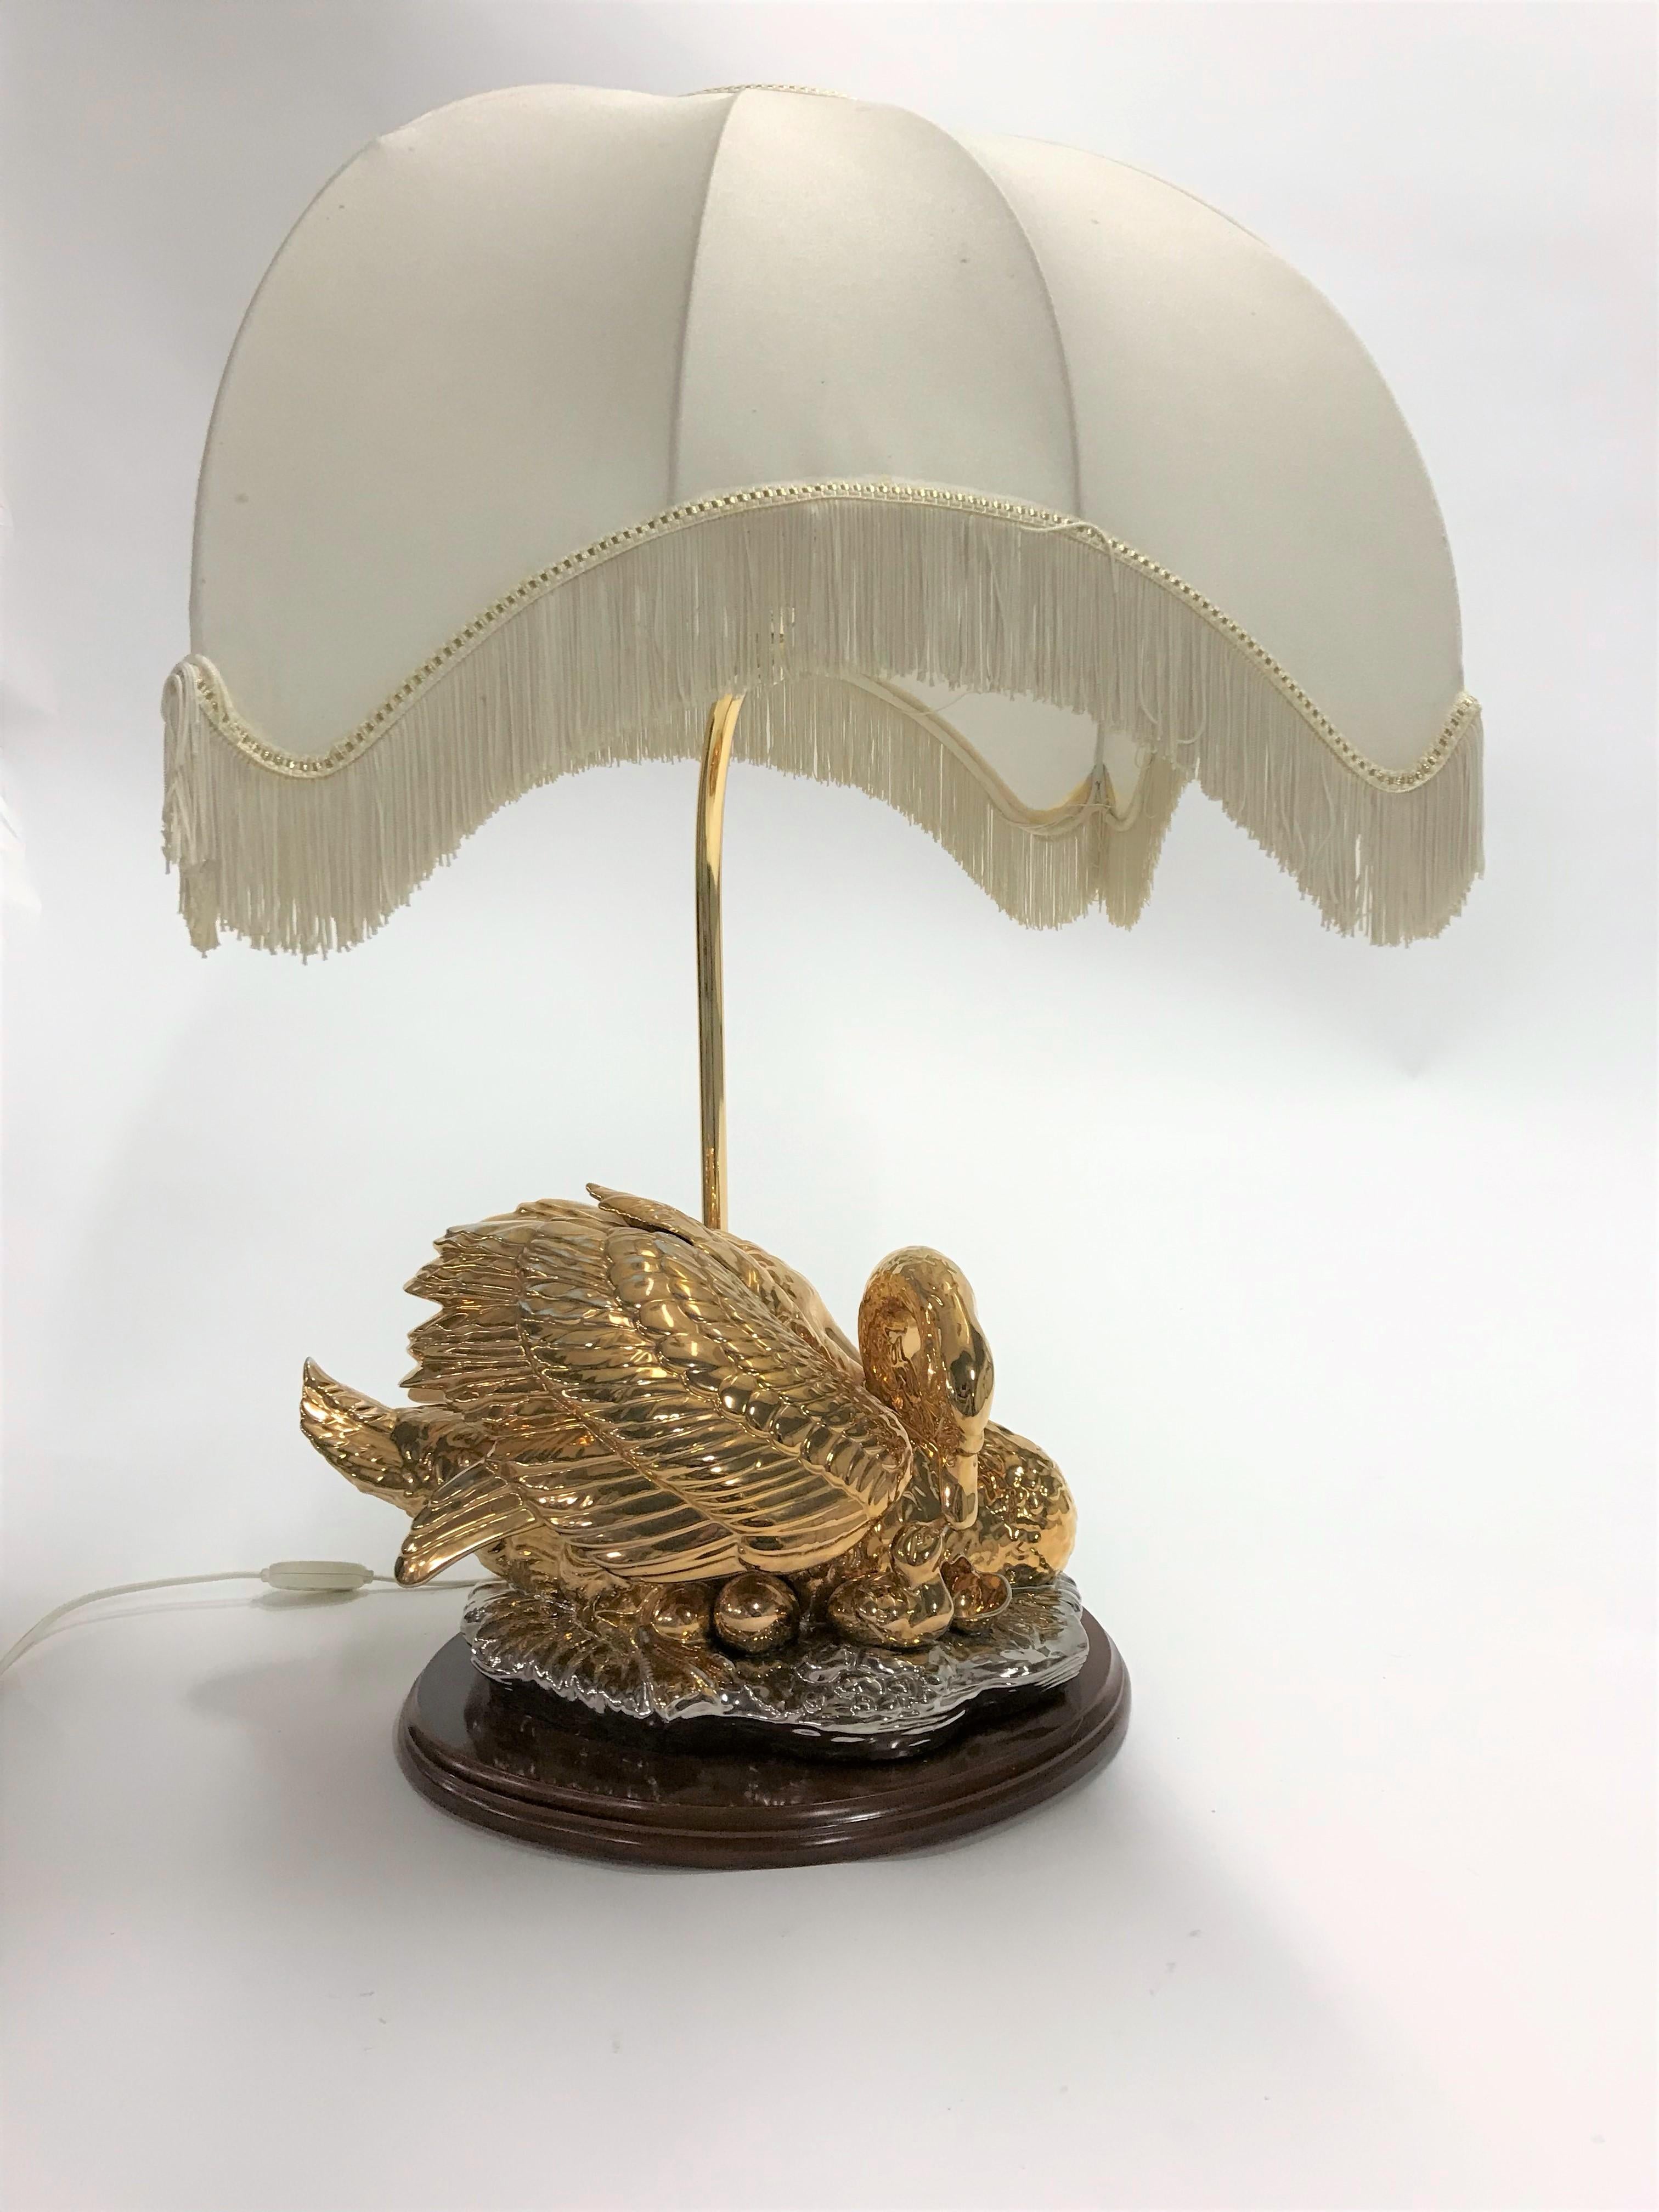 Vintage oversized brass table lamp depicting a sitting swan with a baby swan and eggs.

The sculpture is made of brass and is mounted on a wooden base.

Comes with a huge fabric shade supported by a brass rod.

1960s, Italy

The lamp works